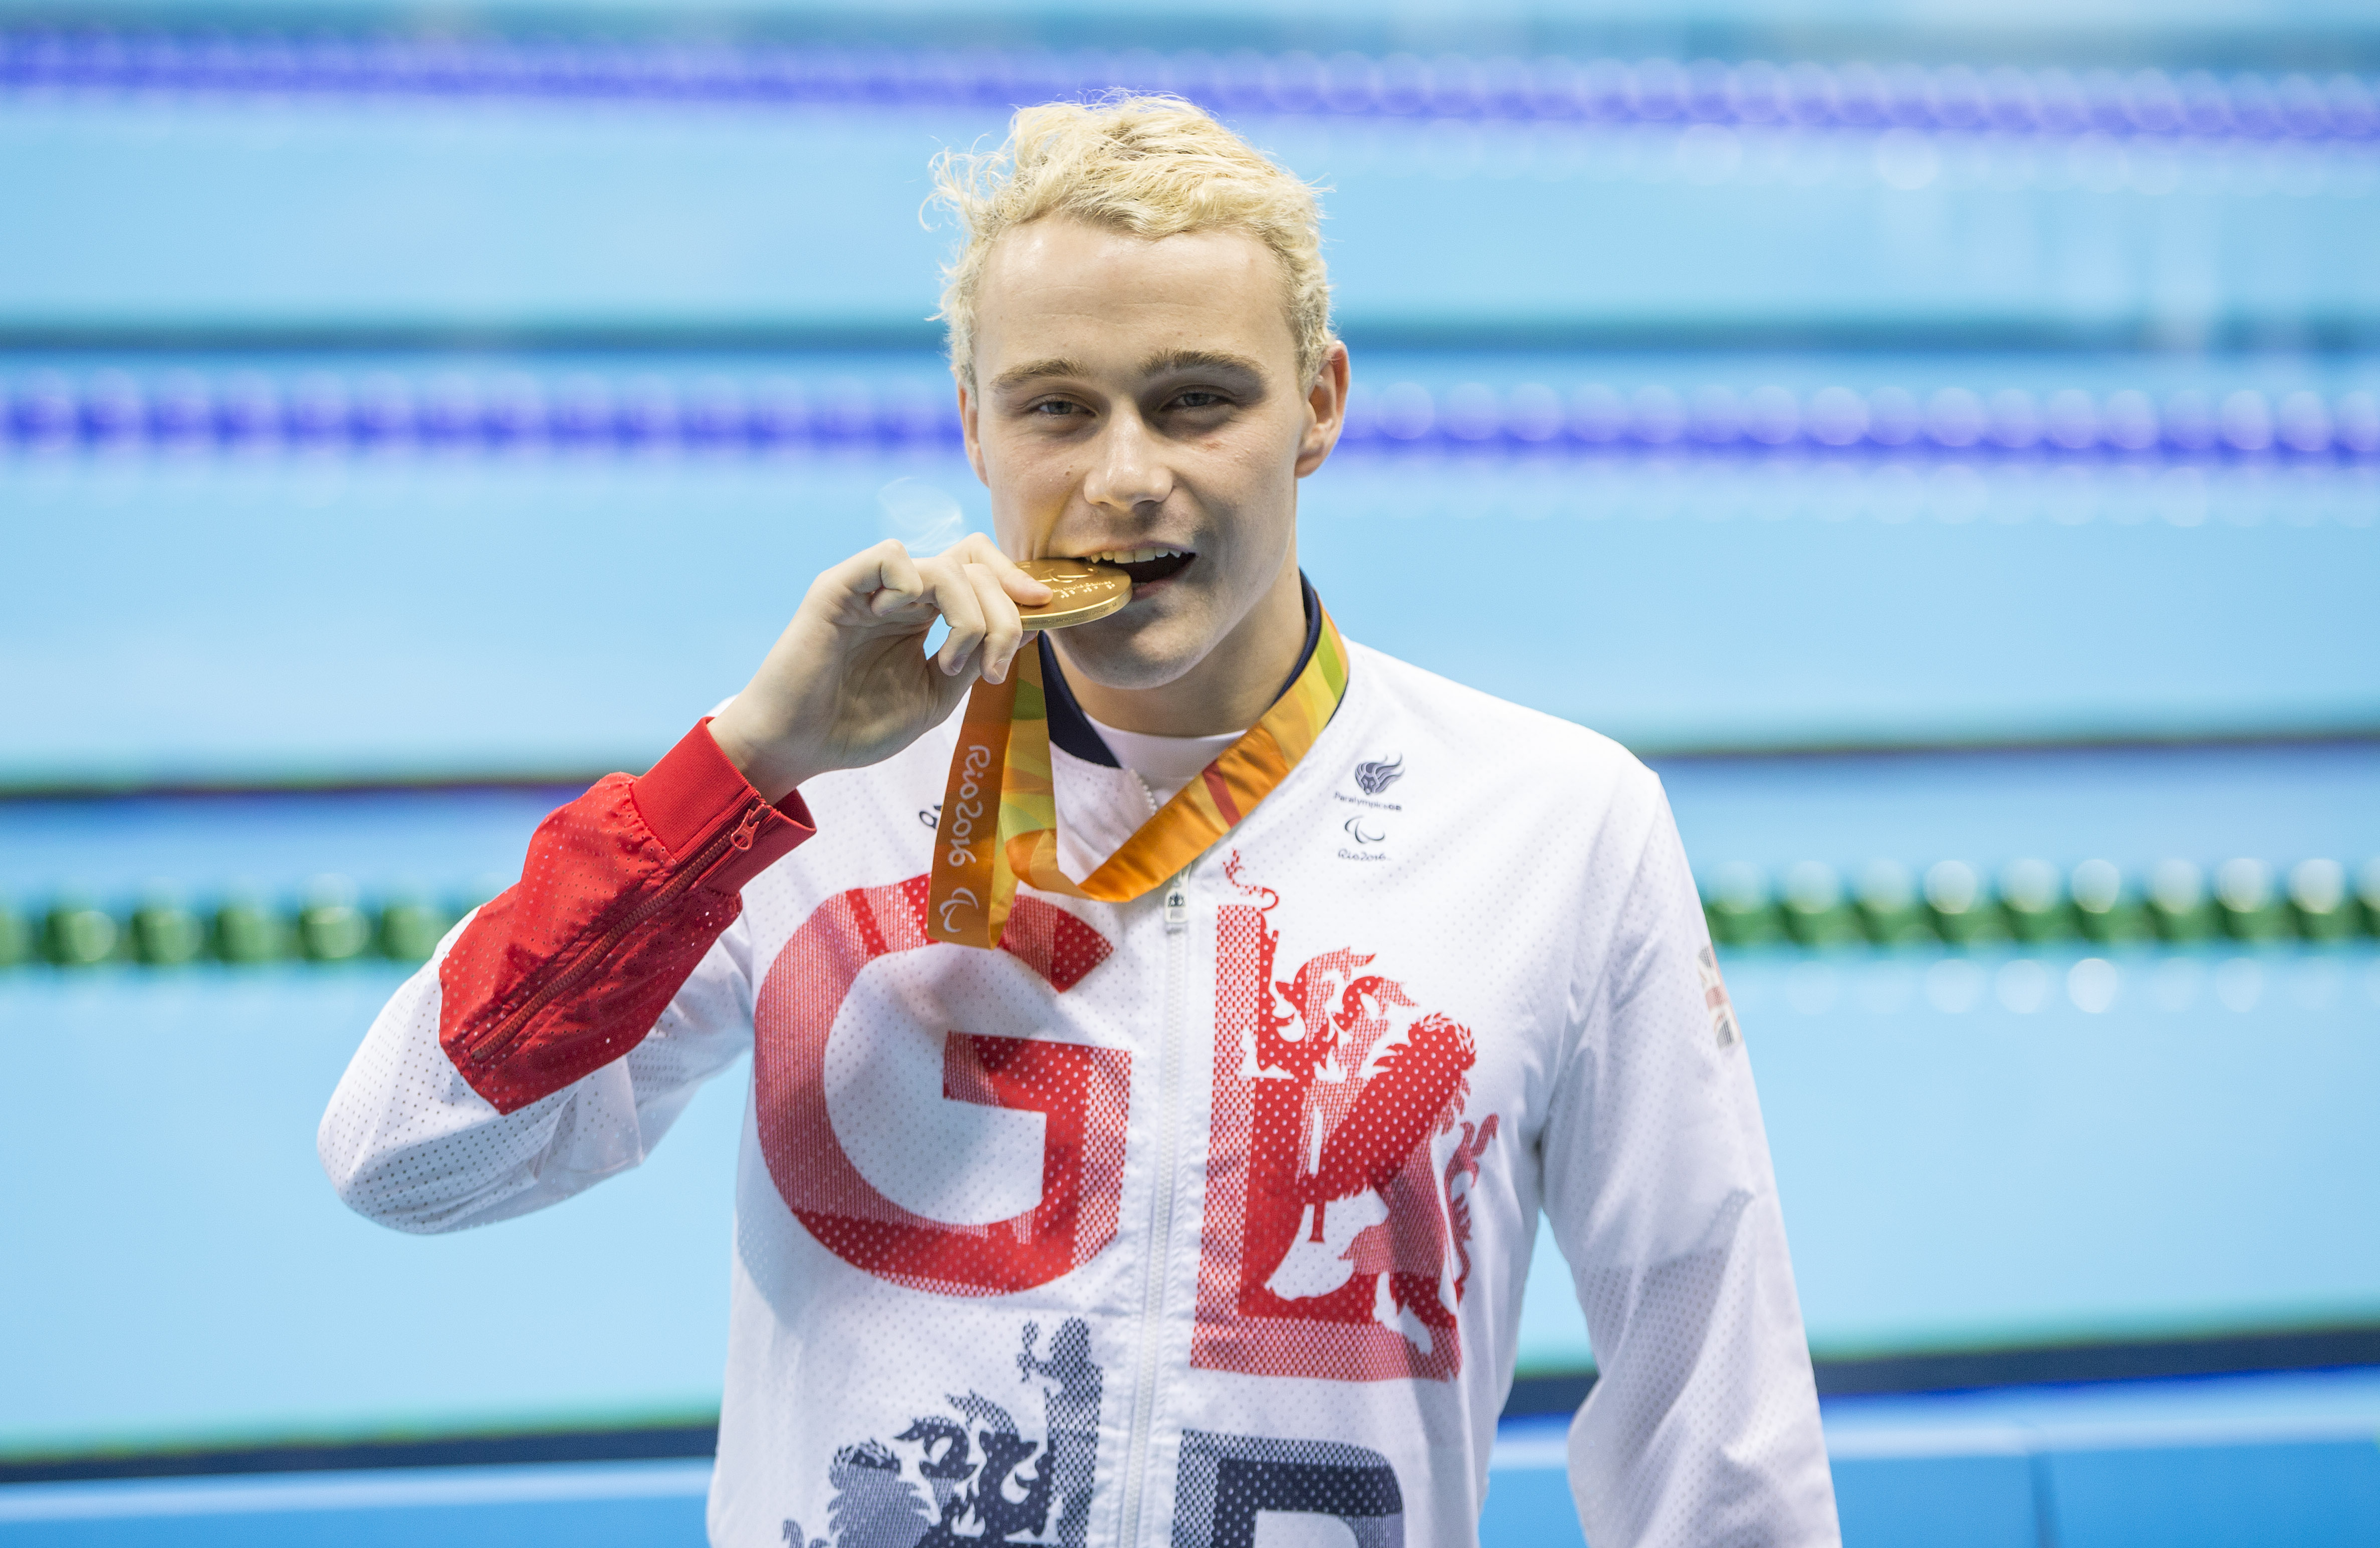 Ollie Hynd wins gold in Rio